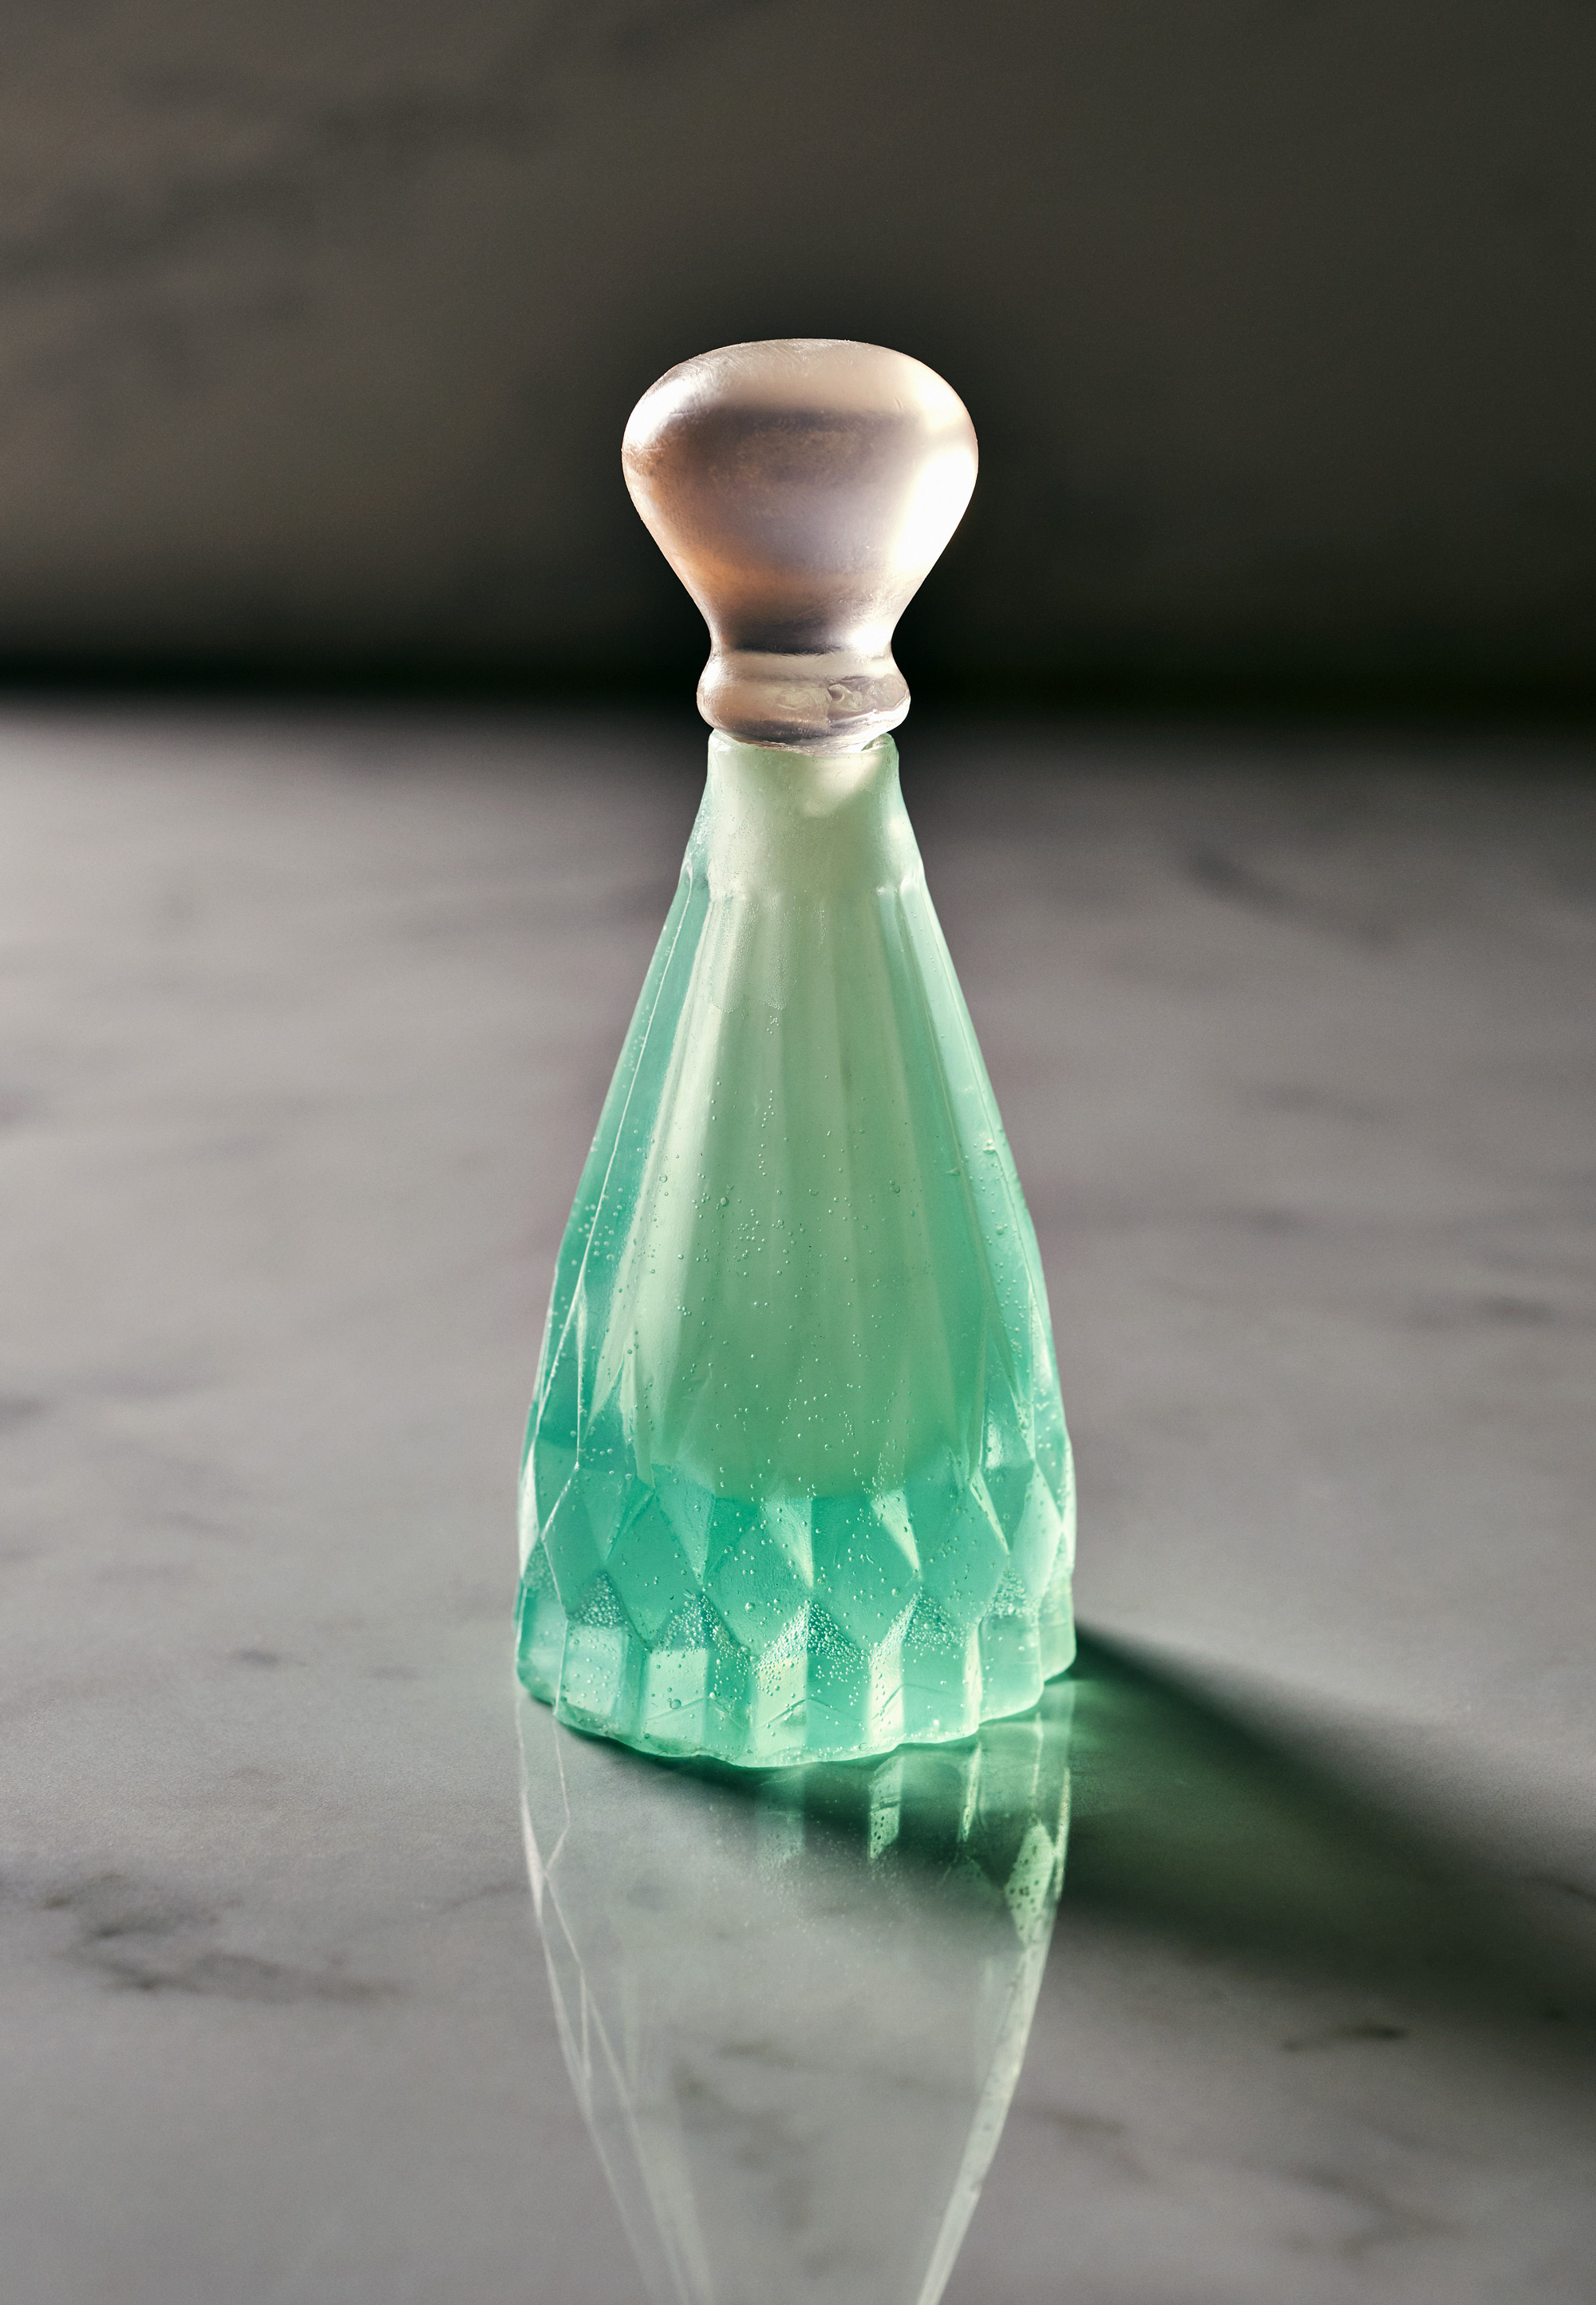 Bottles and Jars Made of Soap Replace Disposable Plastic Packaging